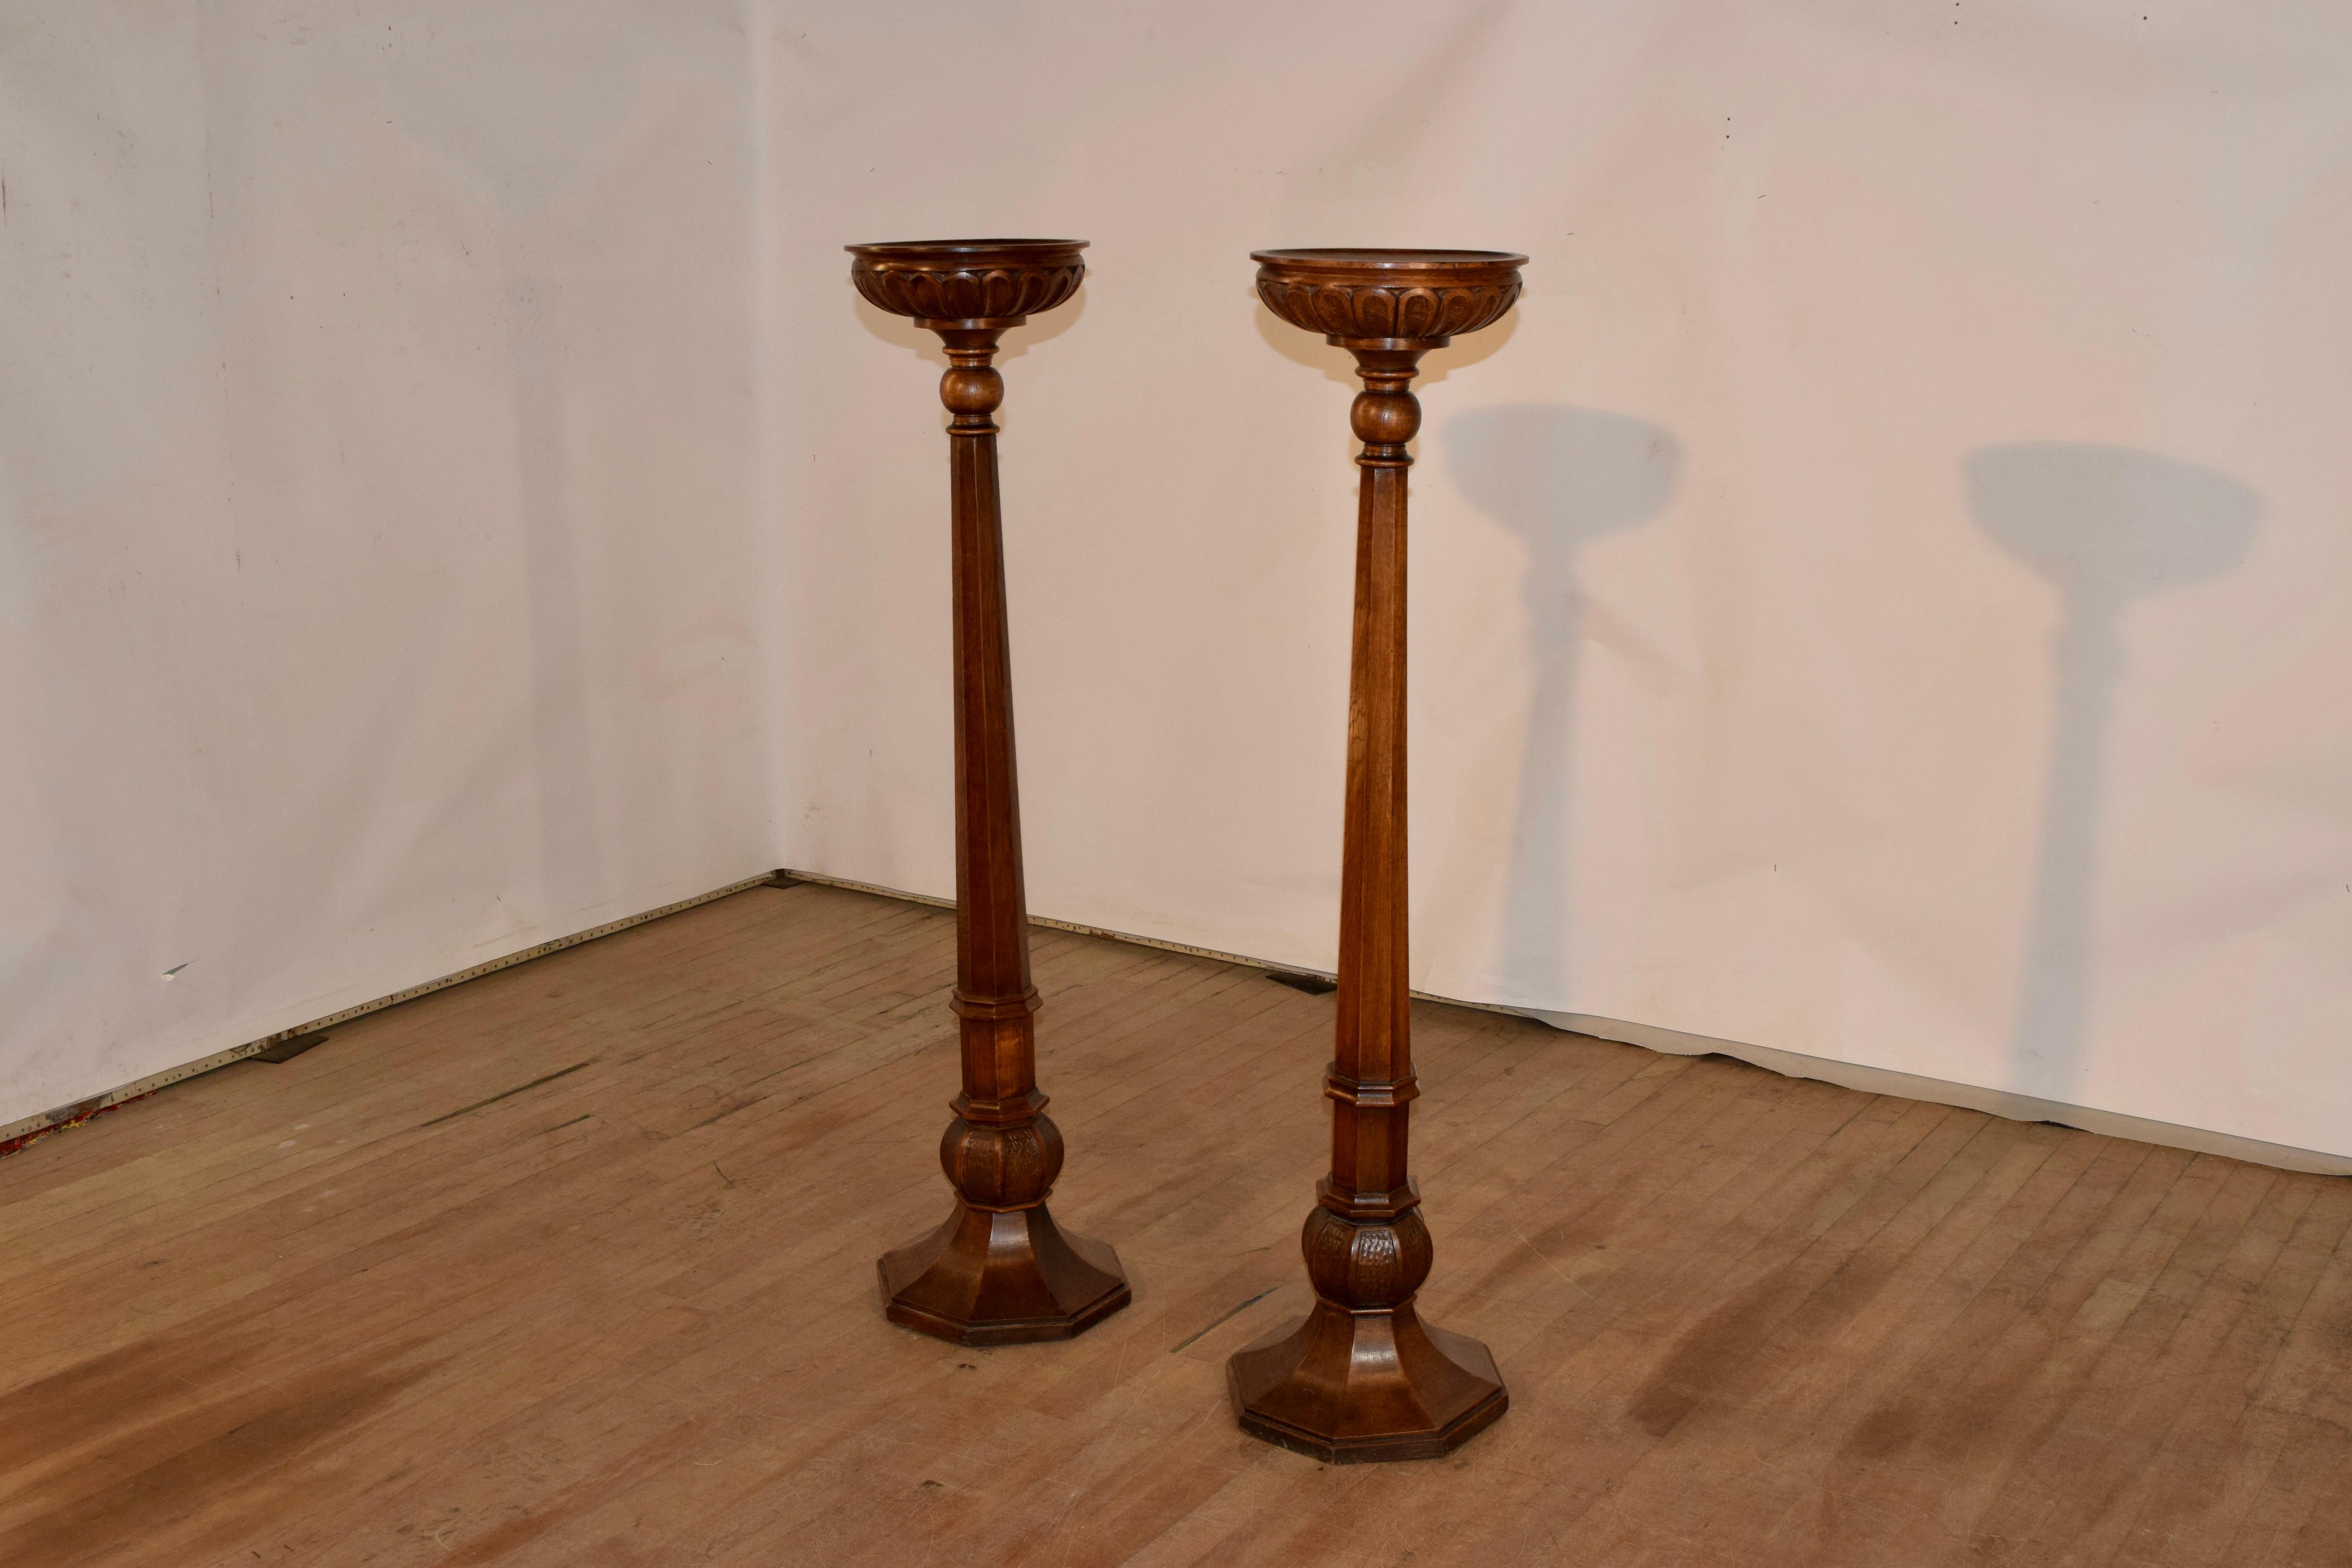 Hand-Carved Pair of Late 19th Century English Pillars